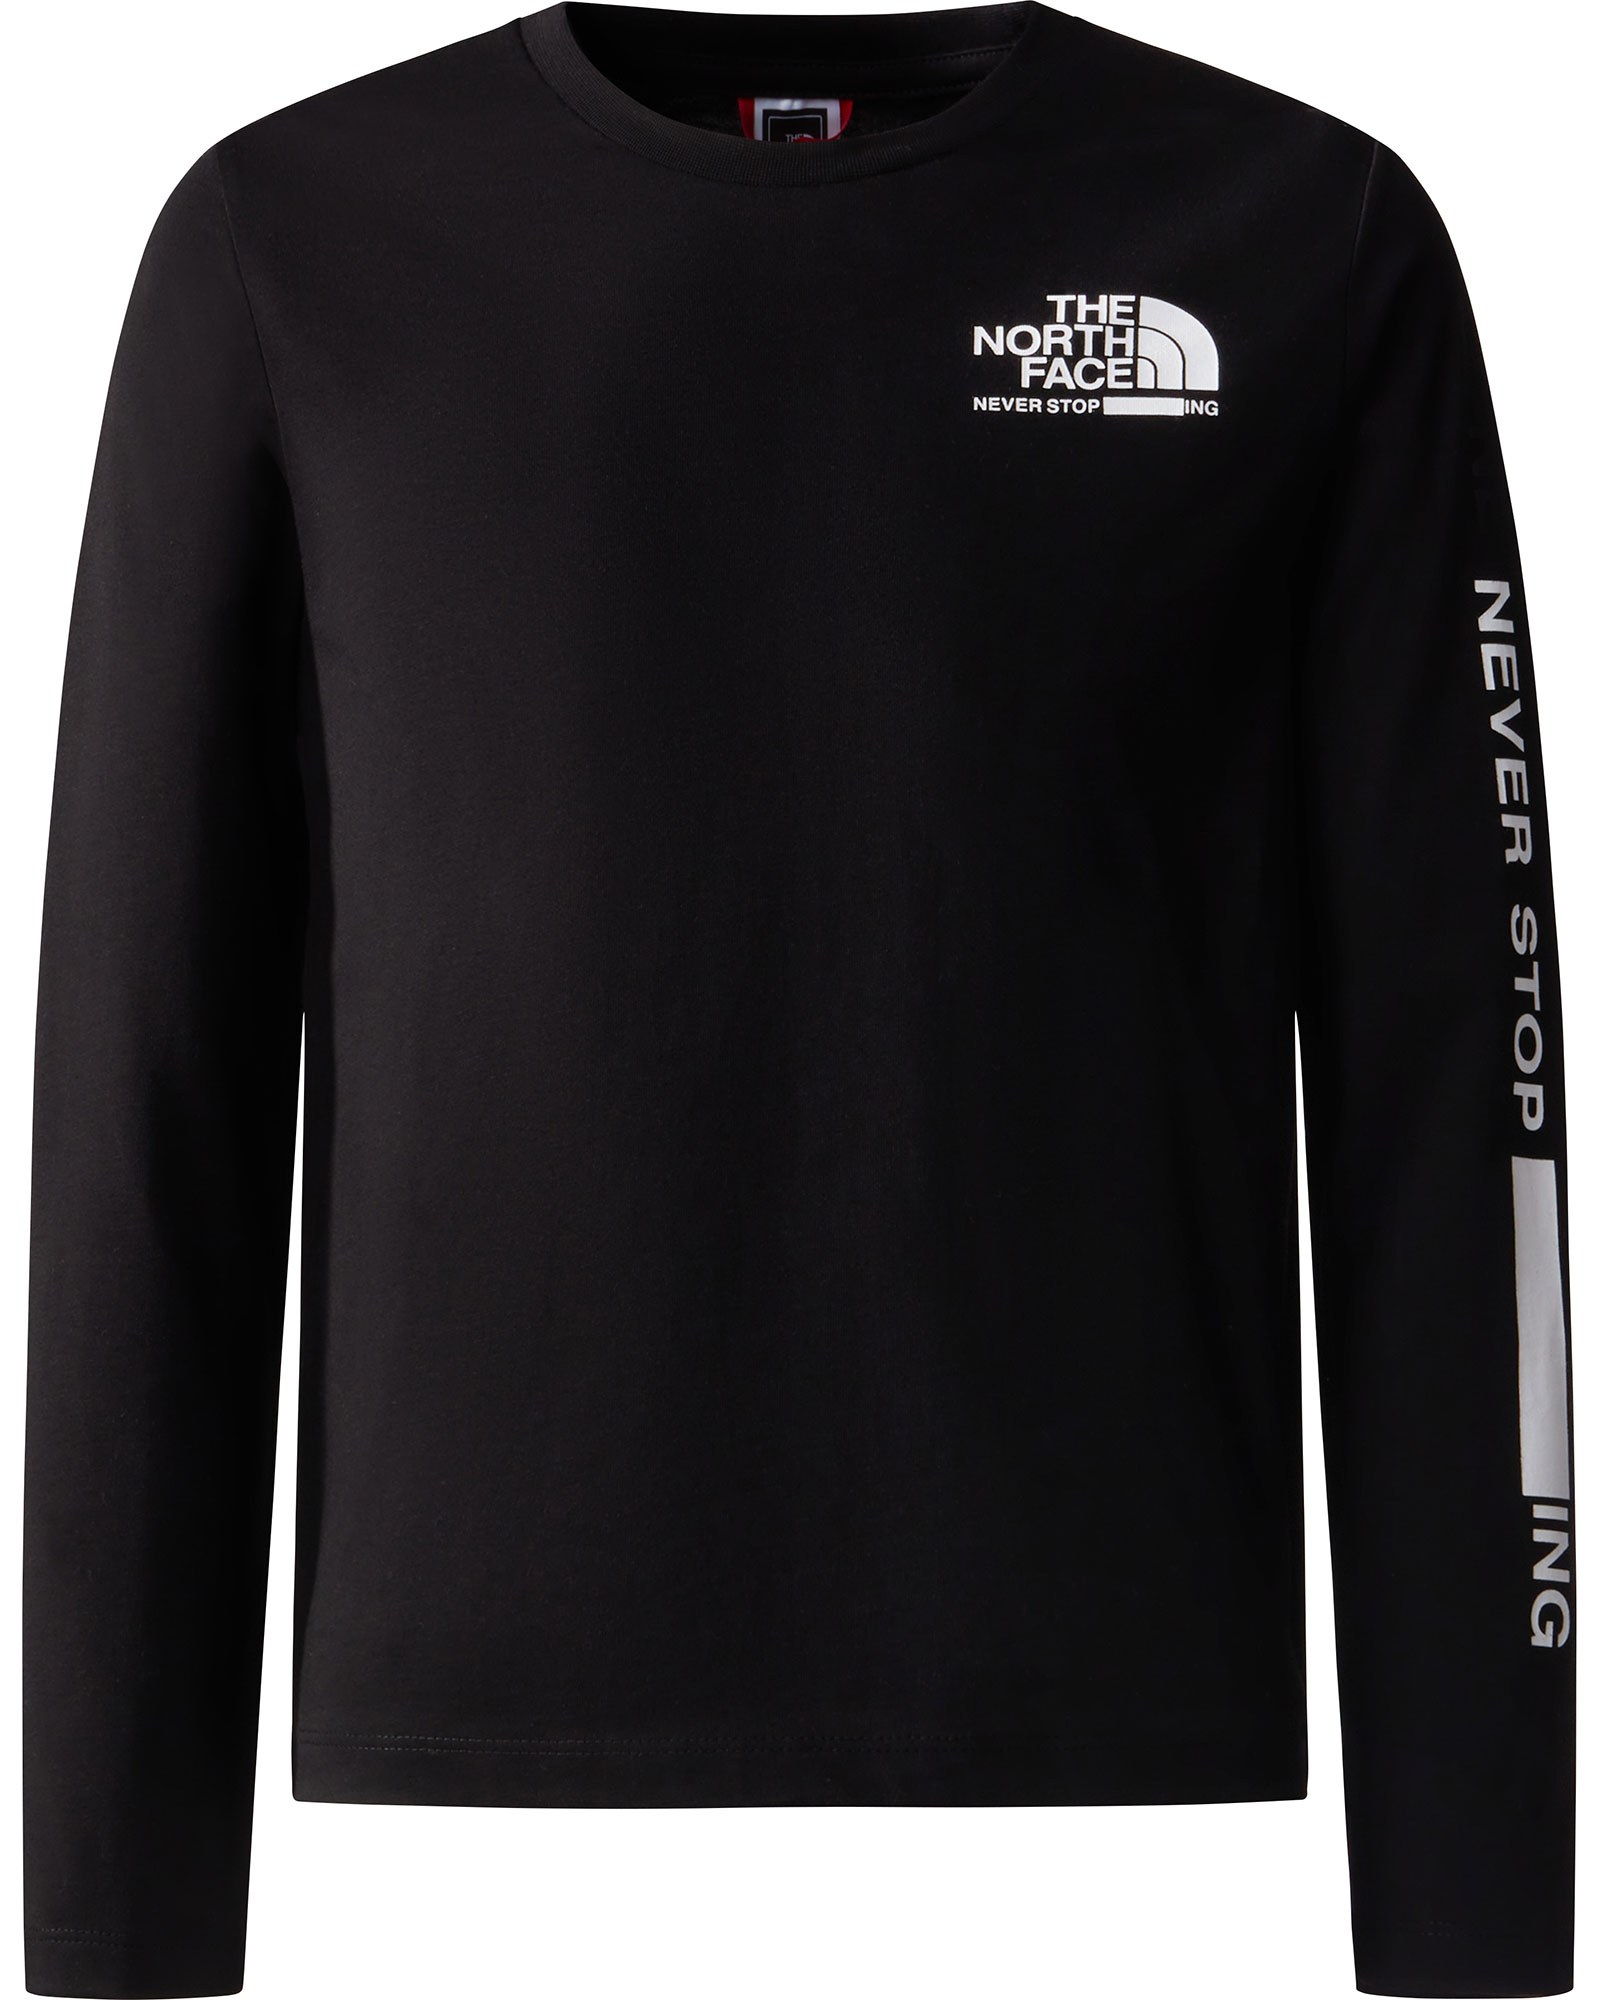 The North Face Youth Graphic Long Sleeved T Shirt 2 - TNF Black M